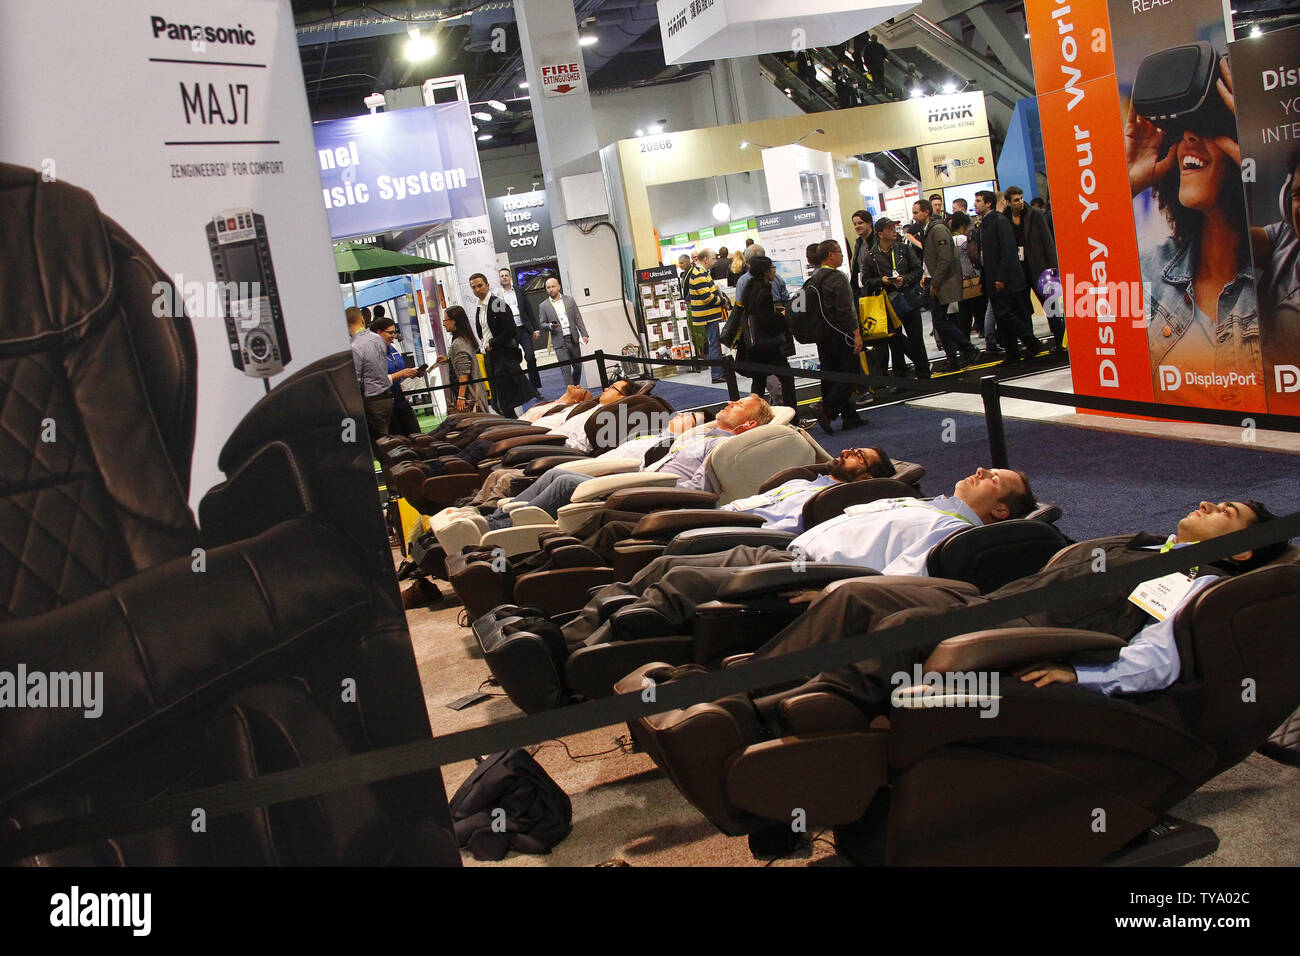 Some very relaxed attendees enjoying Panasonic's MAJ7 luxury massage chairs,  during the 2018 International CES, at the Las Vegas Convention Center in  Las Vegas, Nevada, January 9, 2018. Photo by James Atoa/UPI